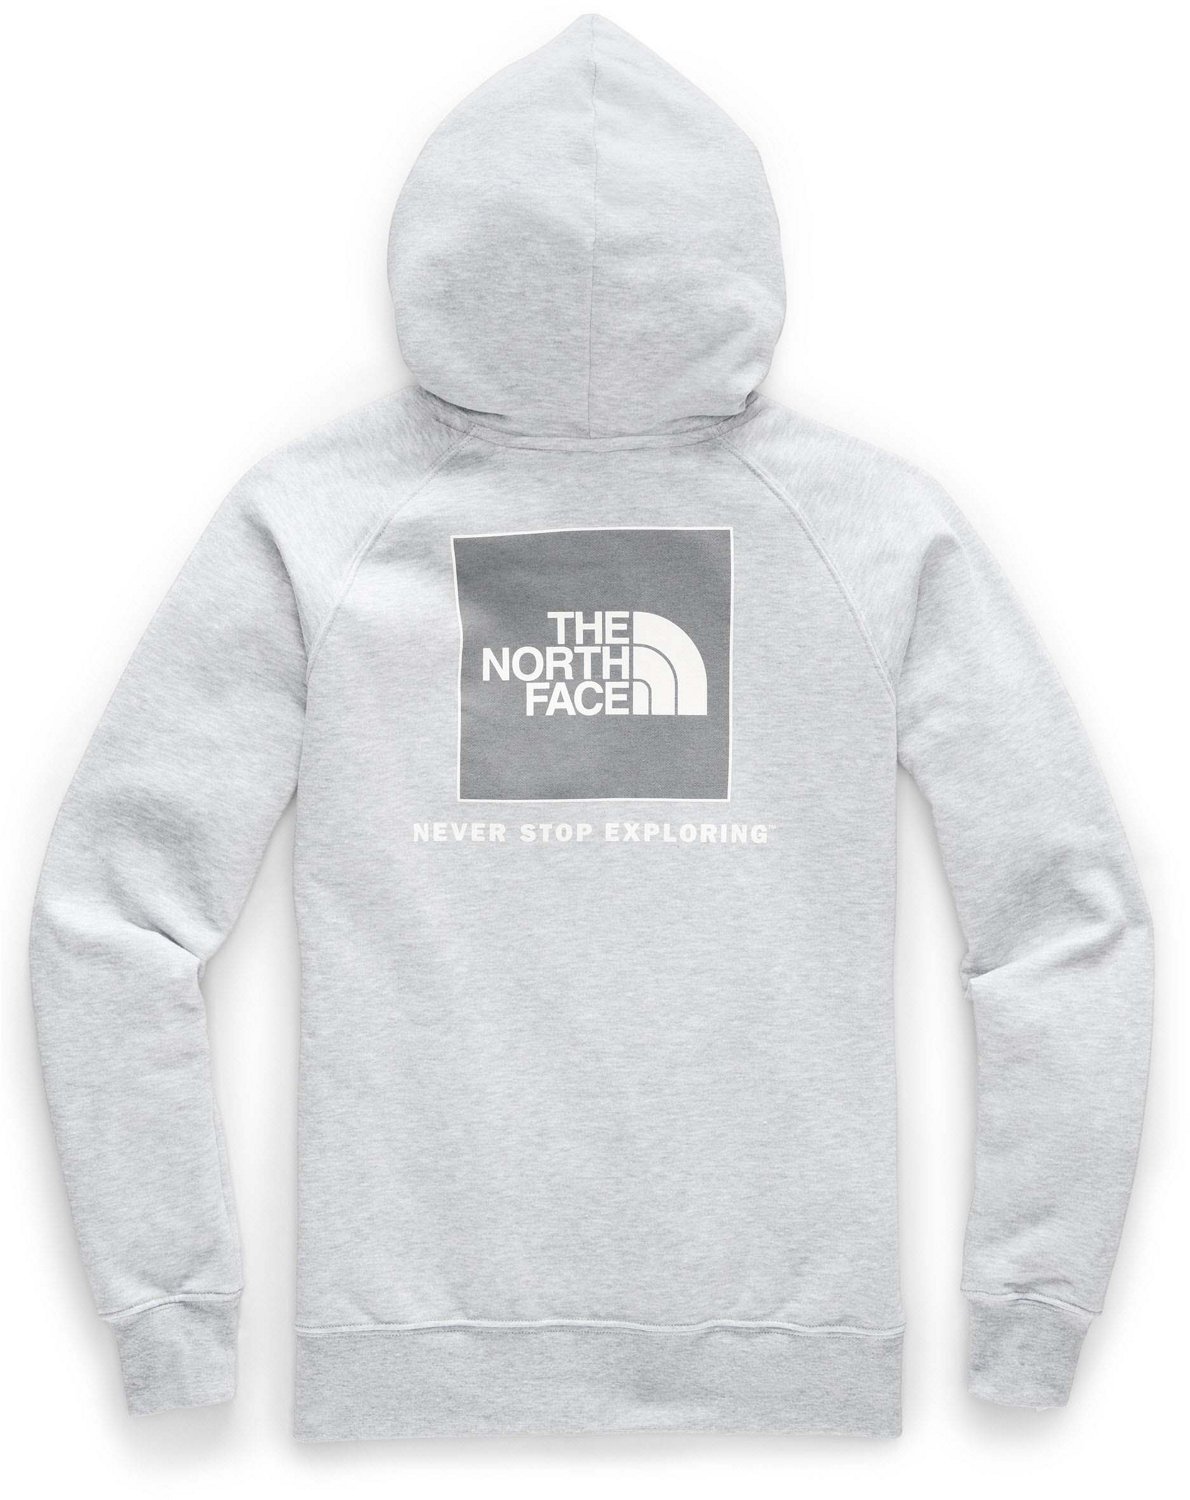 The North Face Women's Red Box Pullover Hoodie